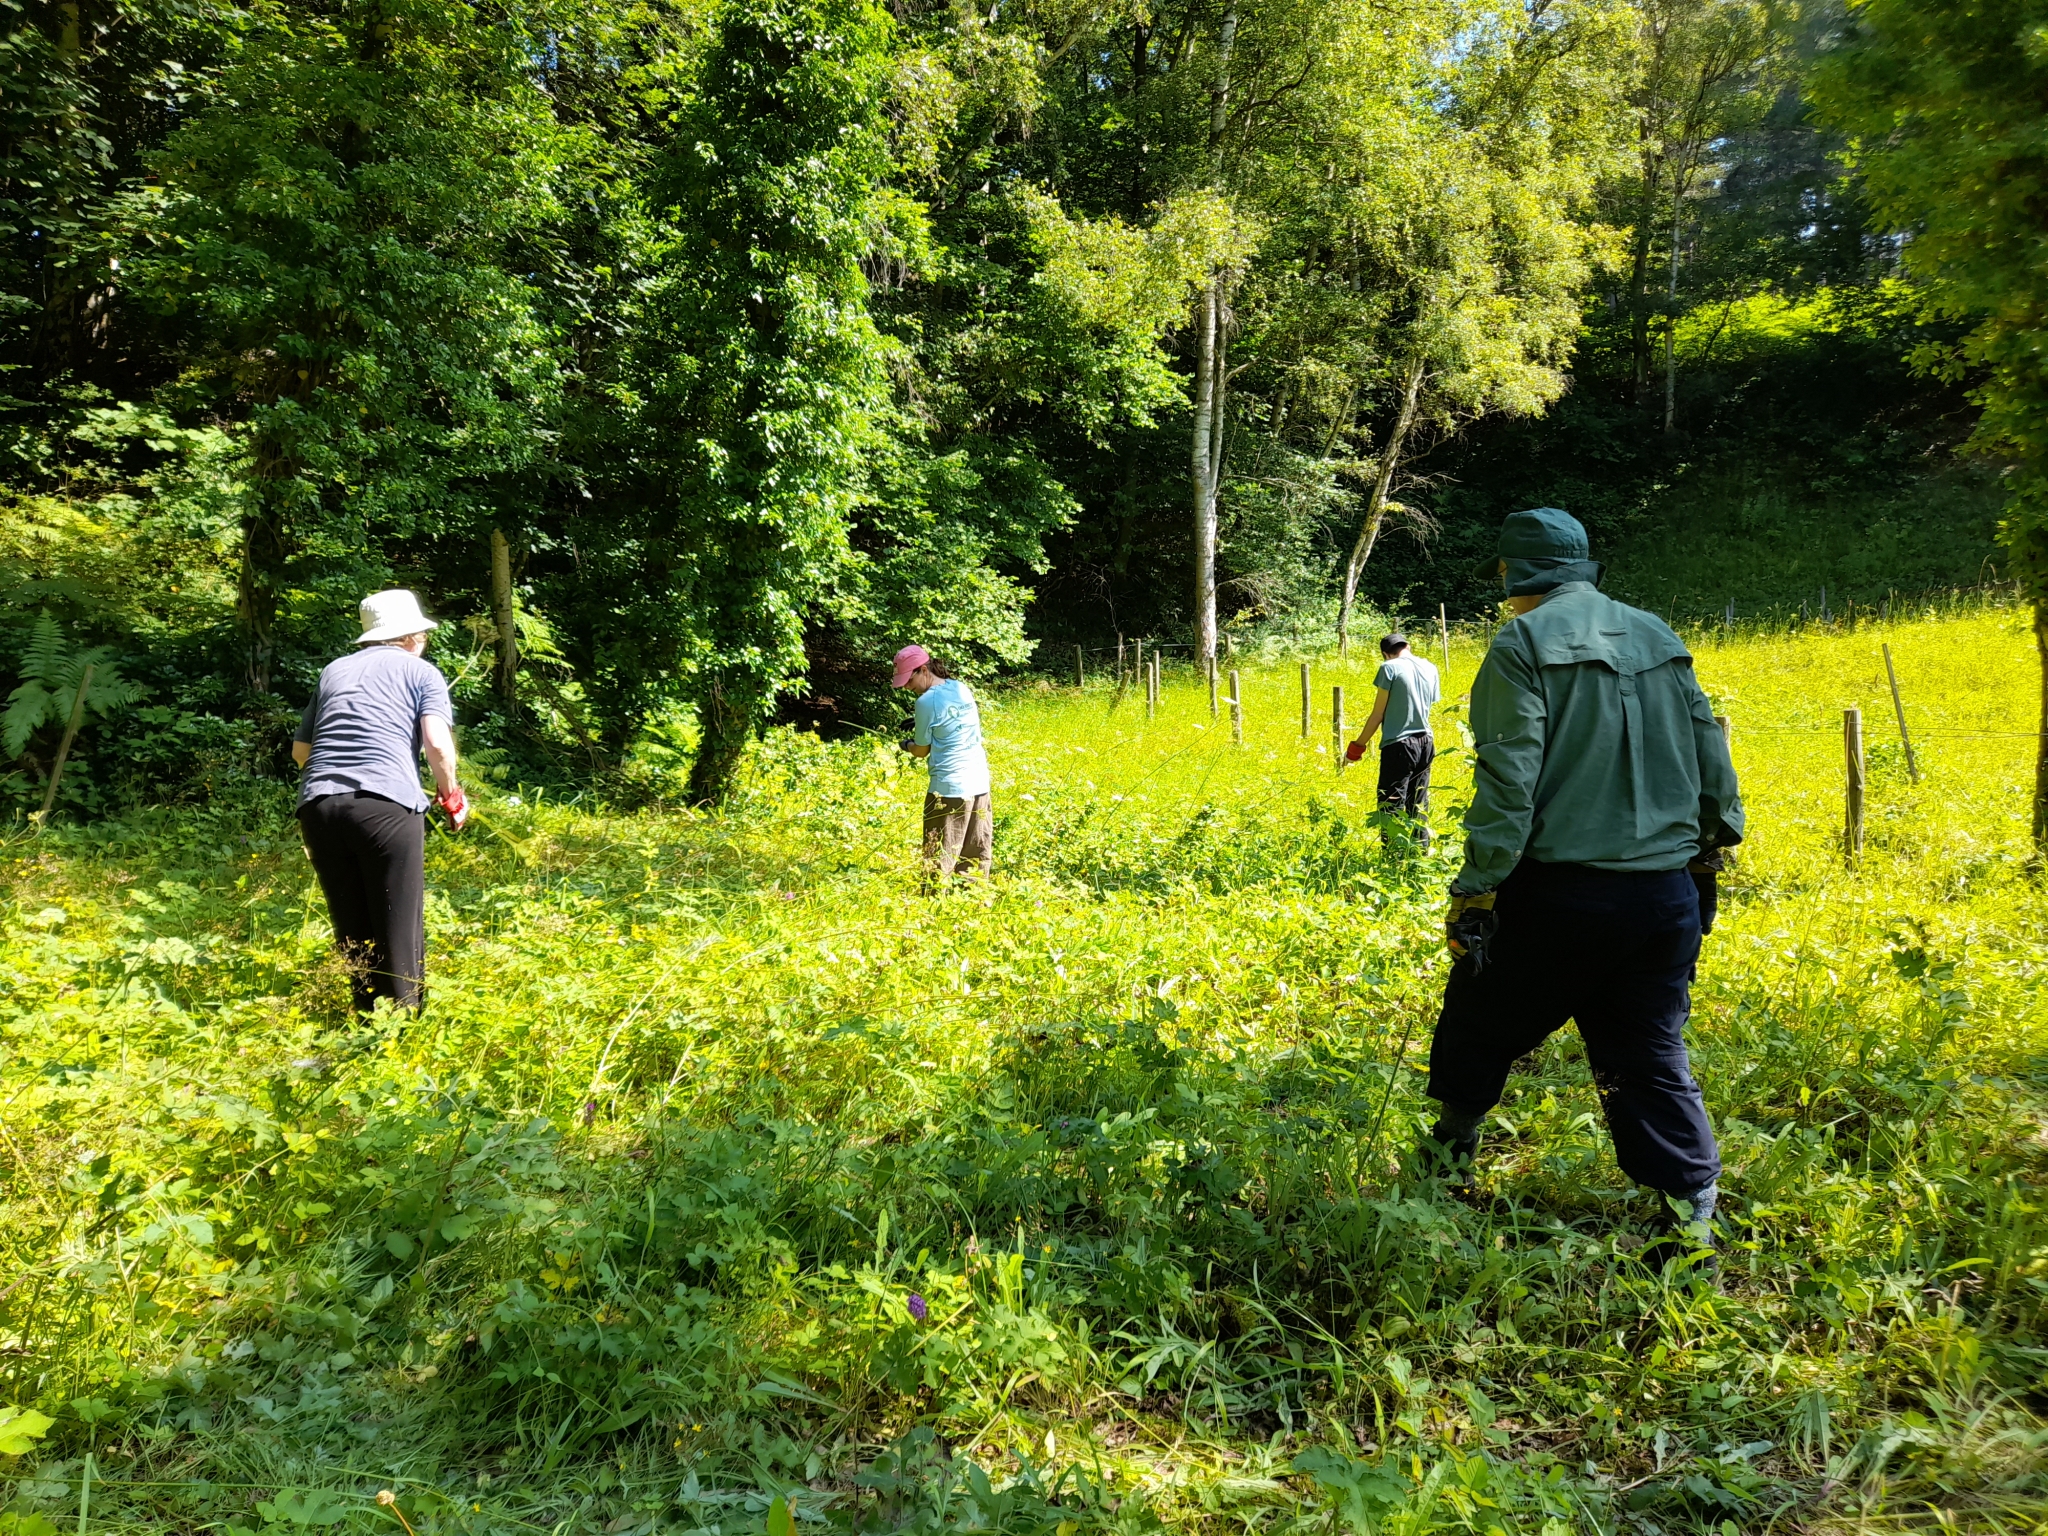 A photo from the FoTF Conservation Event - July 2021 - Maintenance tasks at Rex Graham Reserve : Volunteers, with their backs to the camera, work away in the reserve